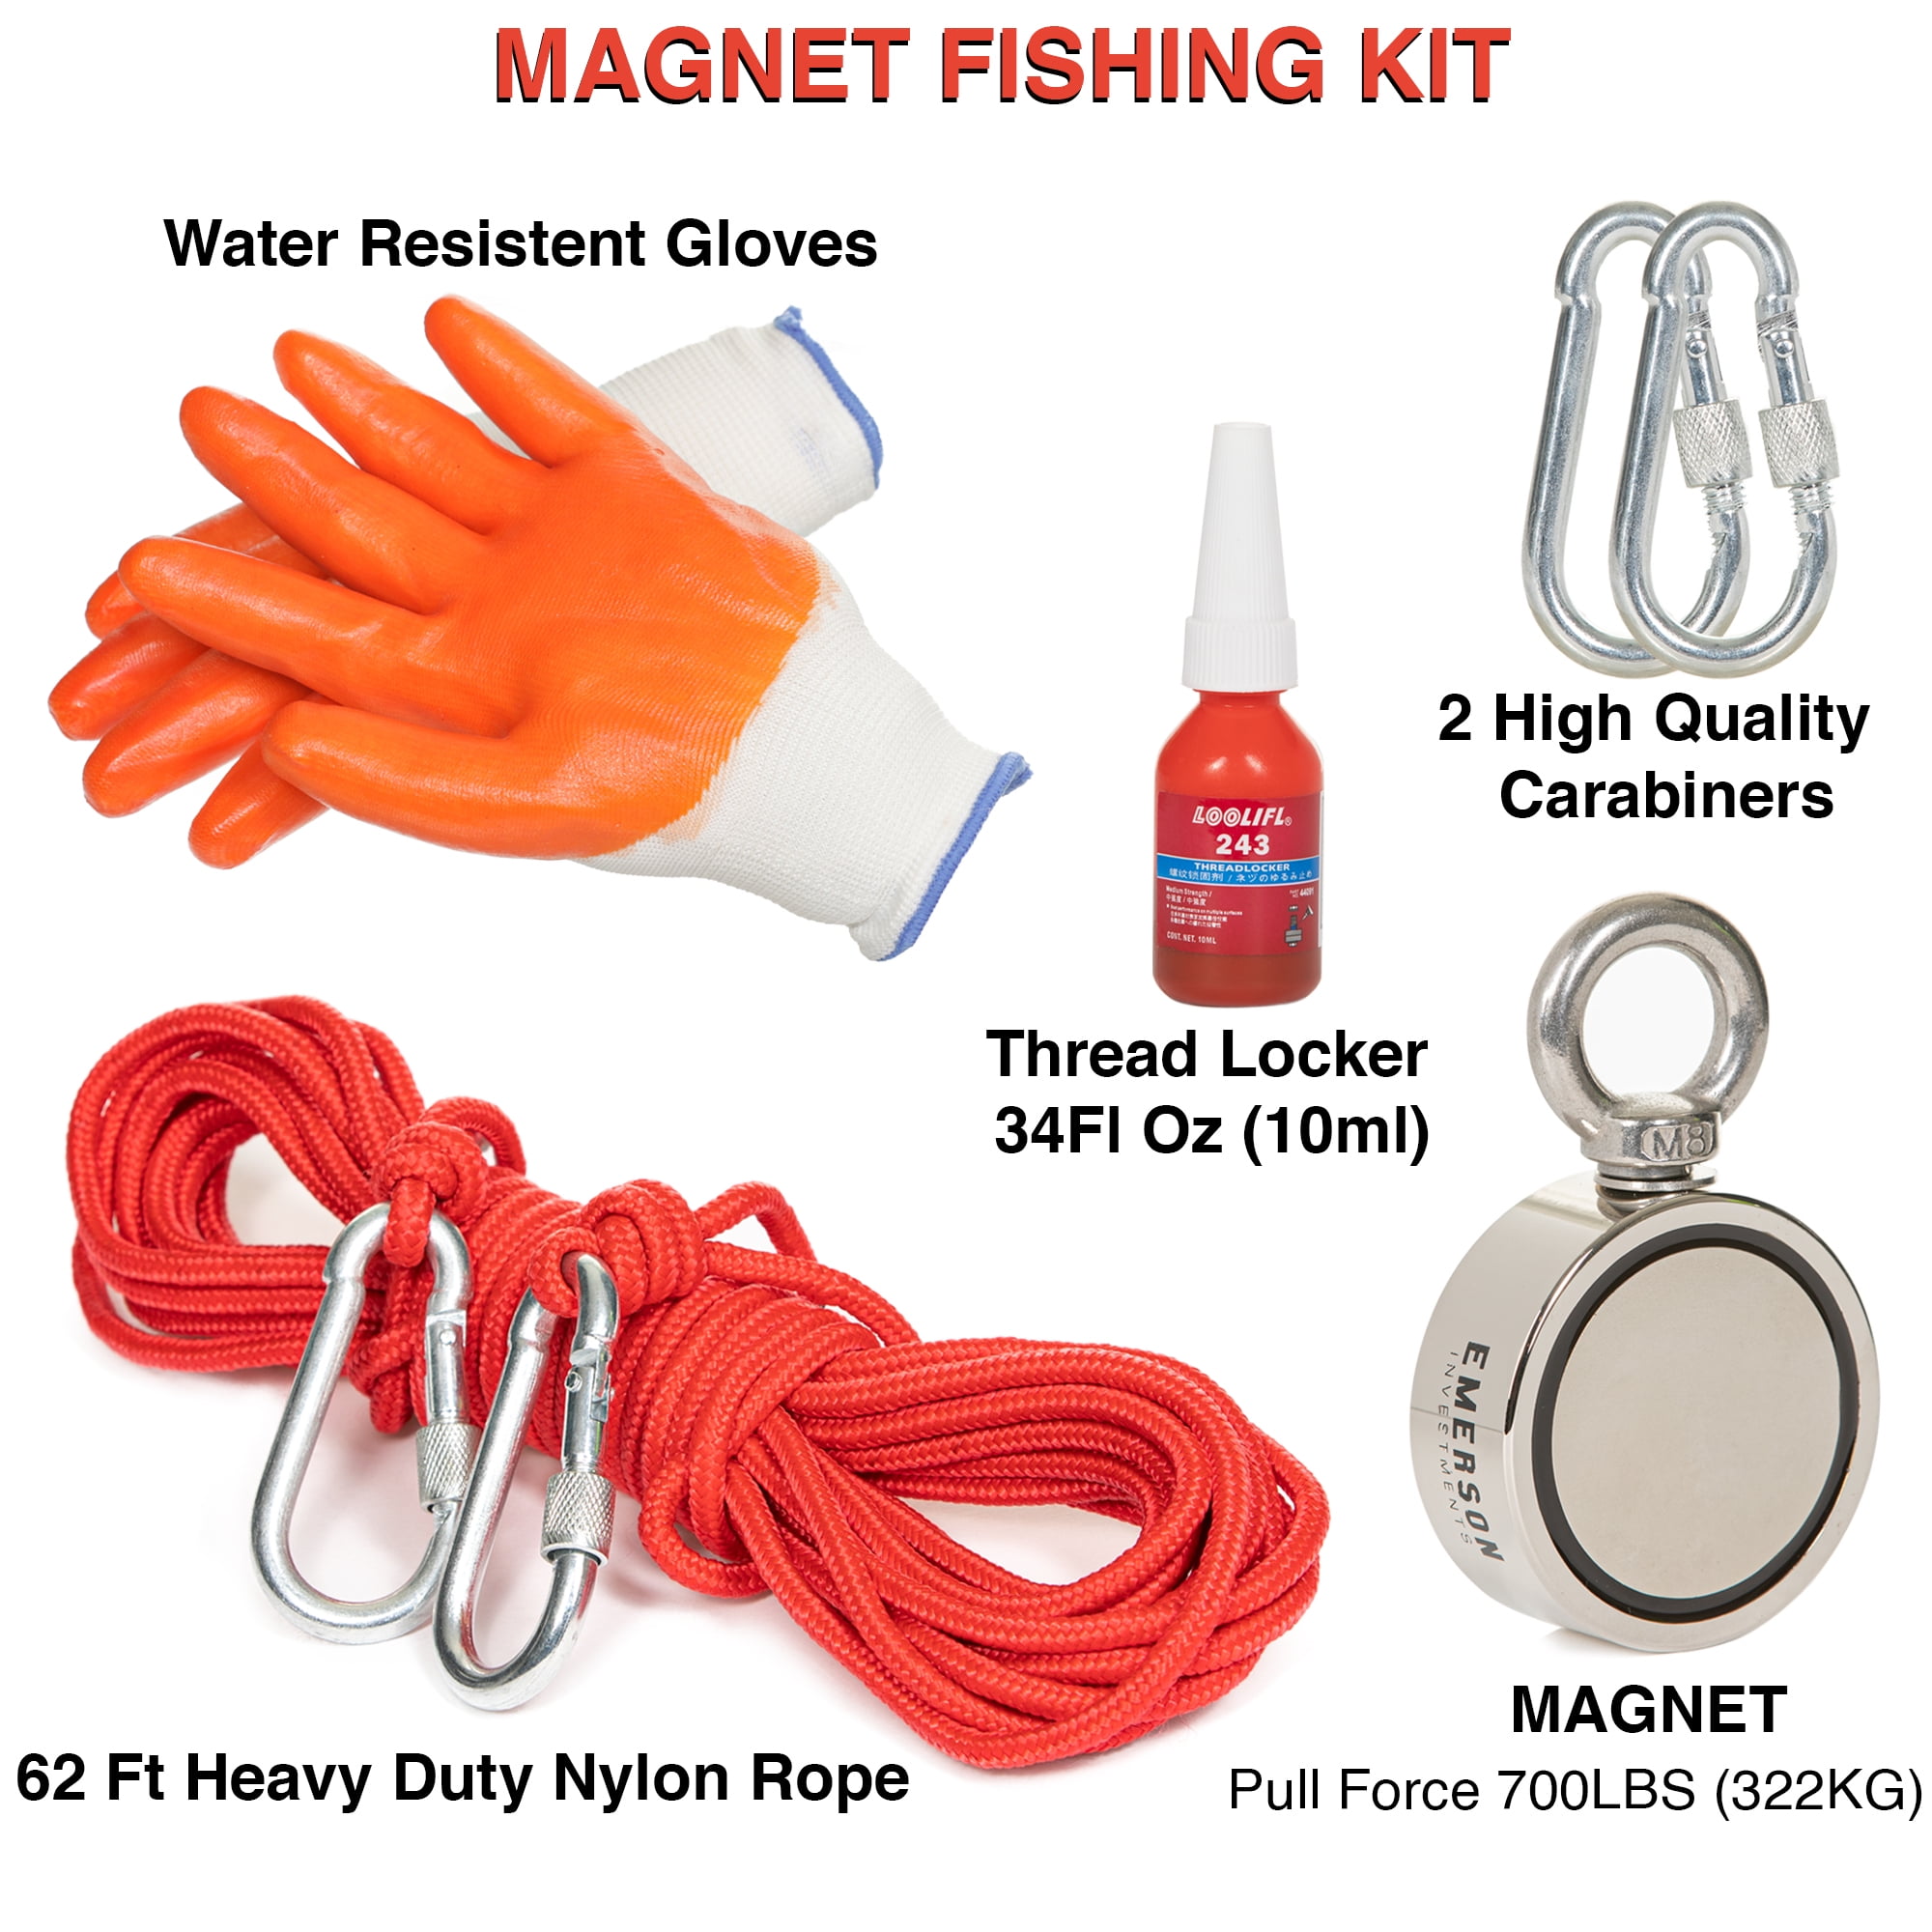 NEW 960 lbs Double Sided Fishing Magnet Kit With Gloves 64 ft Rope & Carabiner